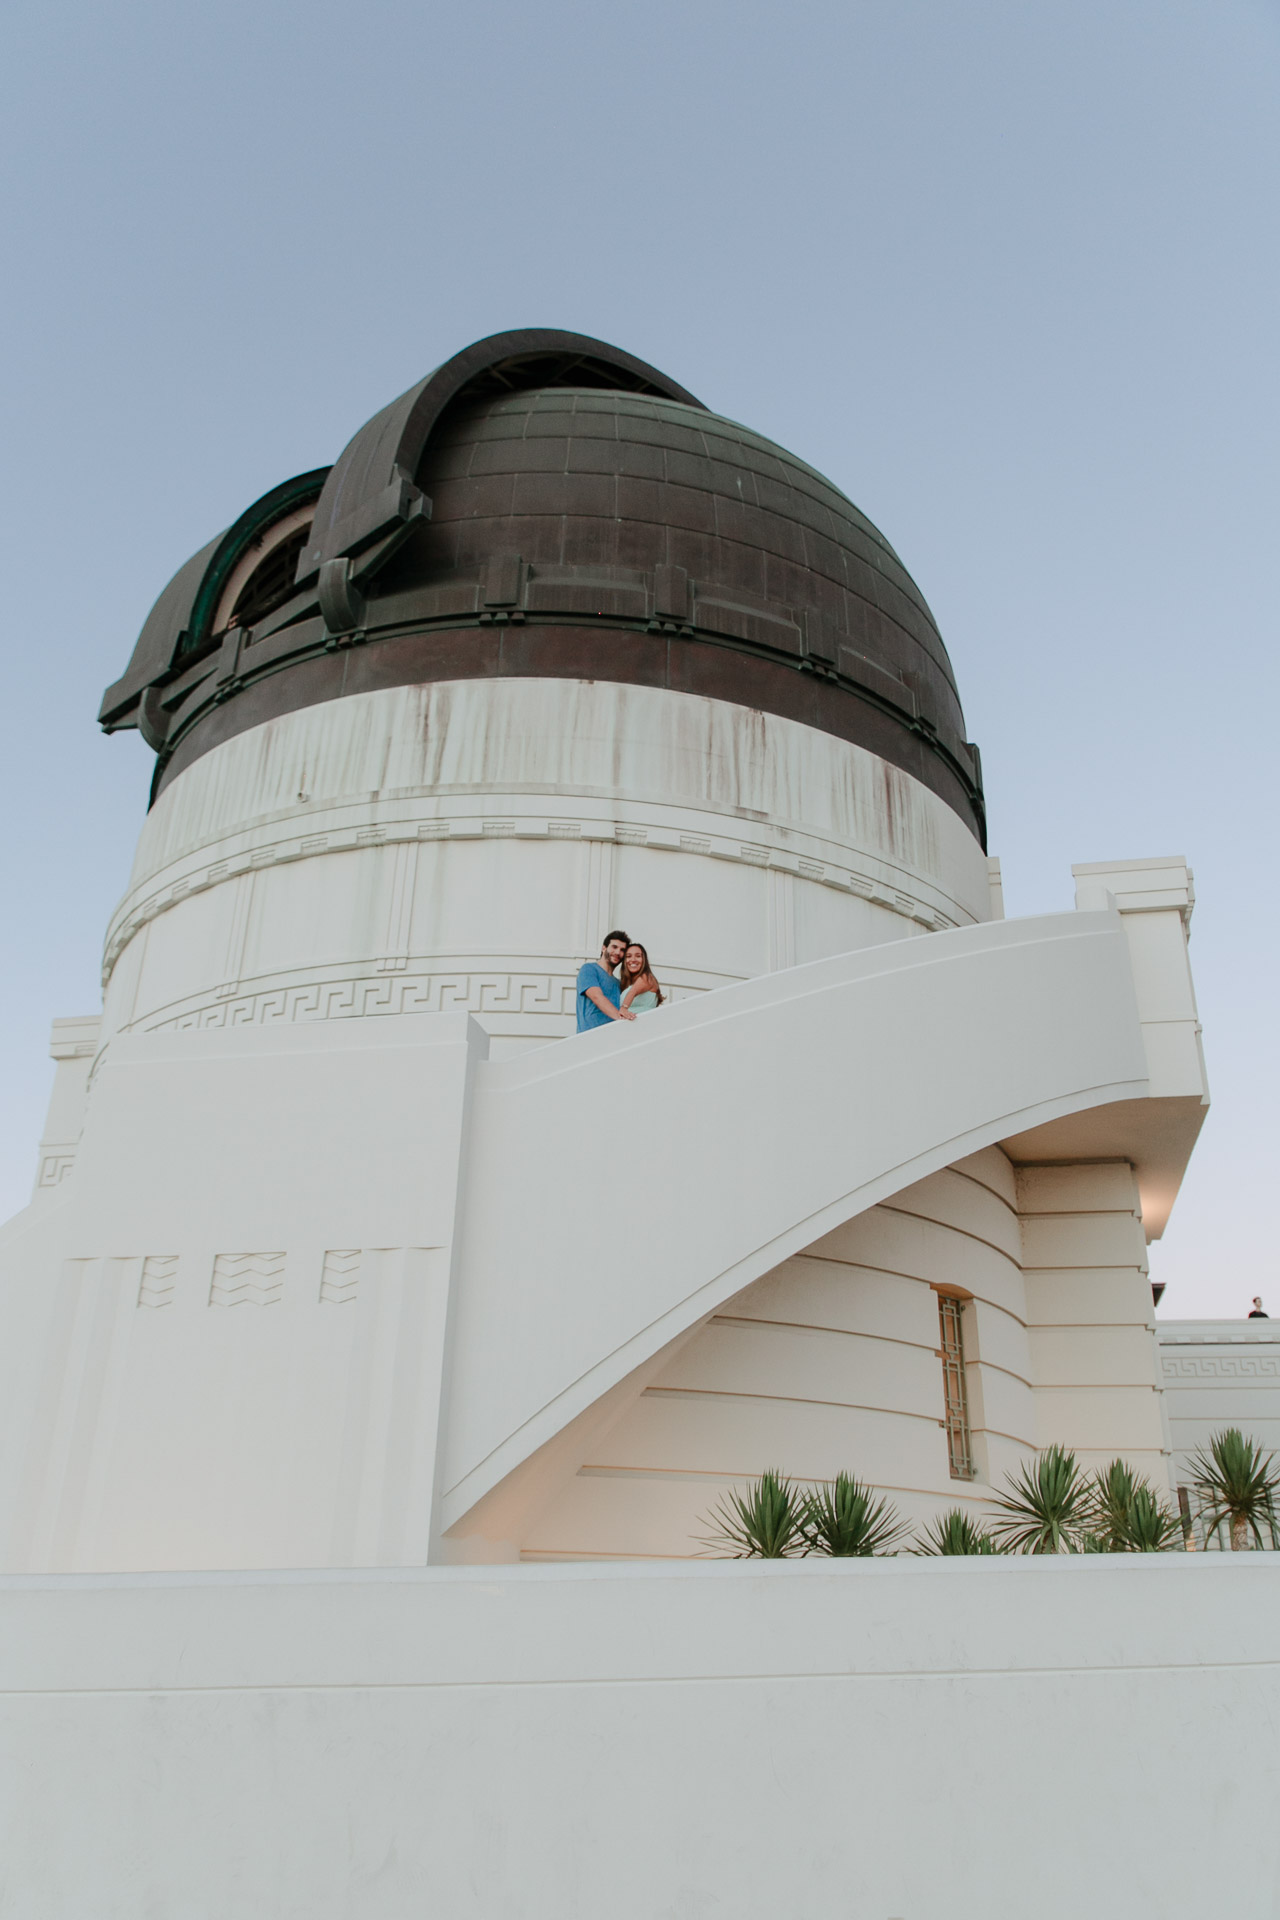 griffith observatory engagement session